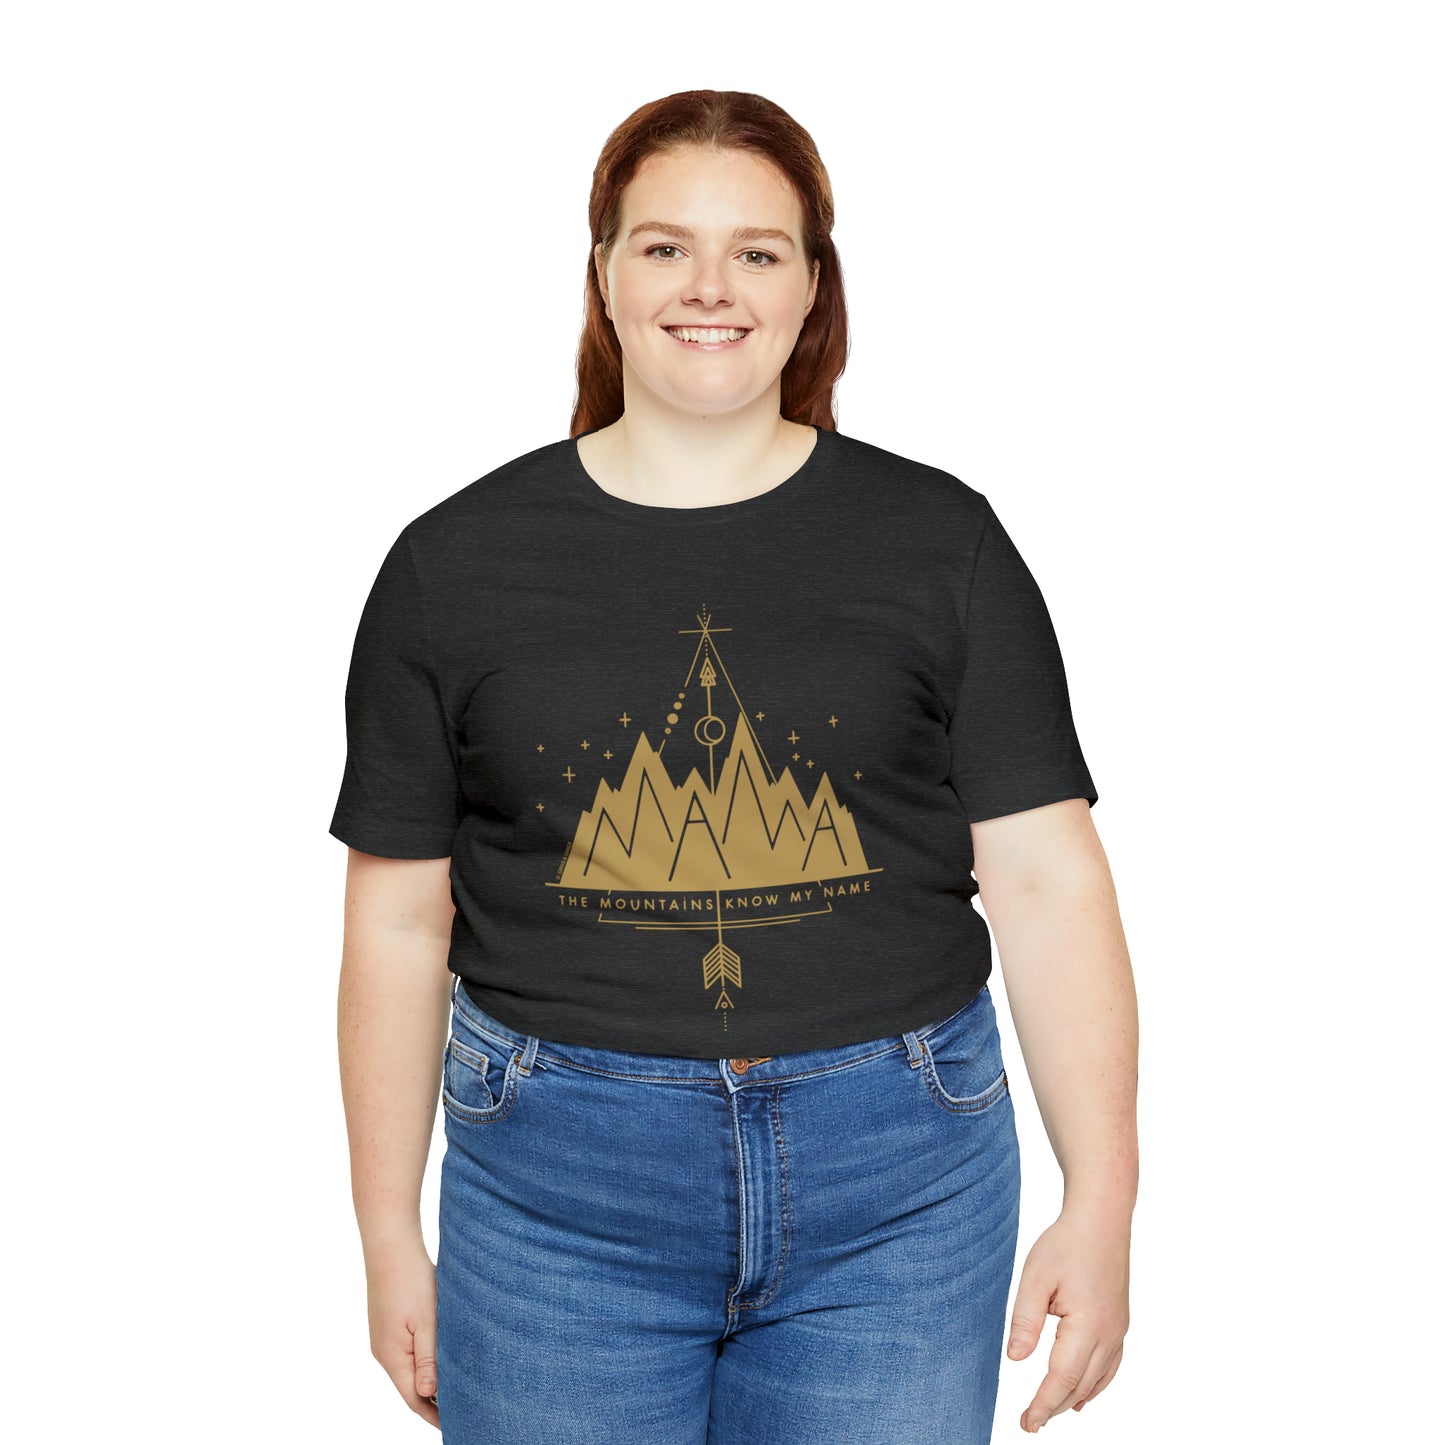 'MAMA: THE MOUNTAINS KNOW MY NAME' MOM T-SHIRT